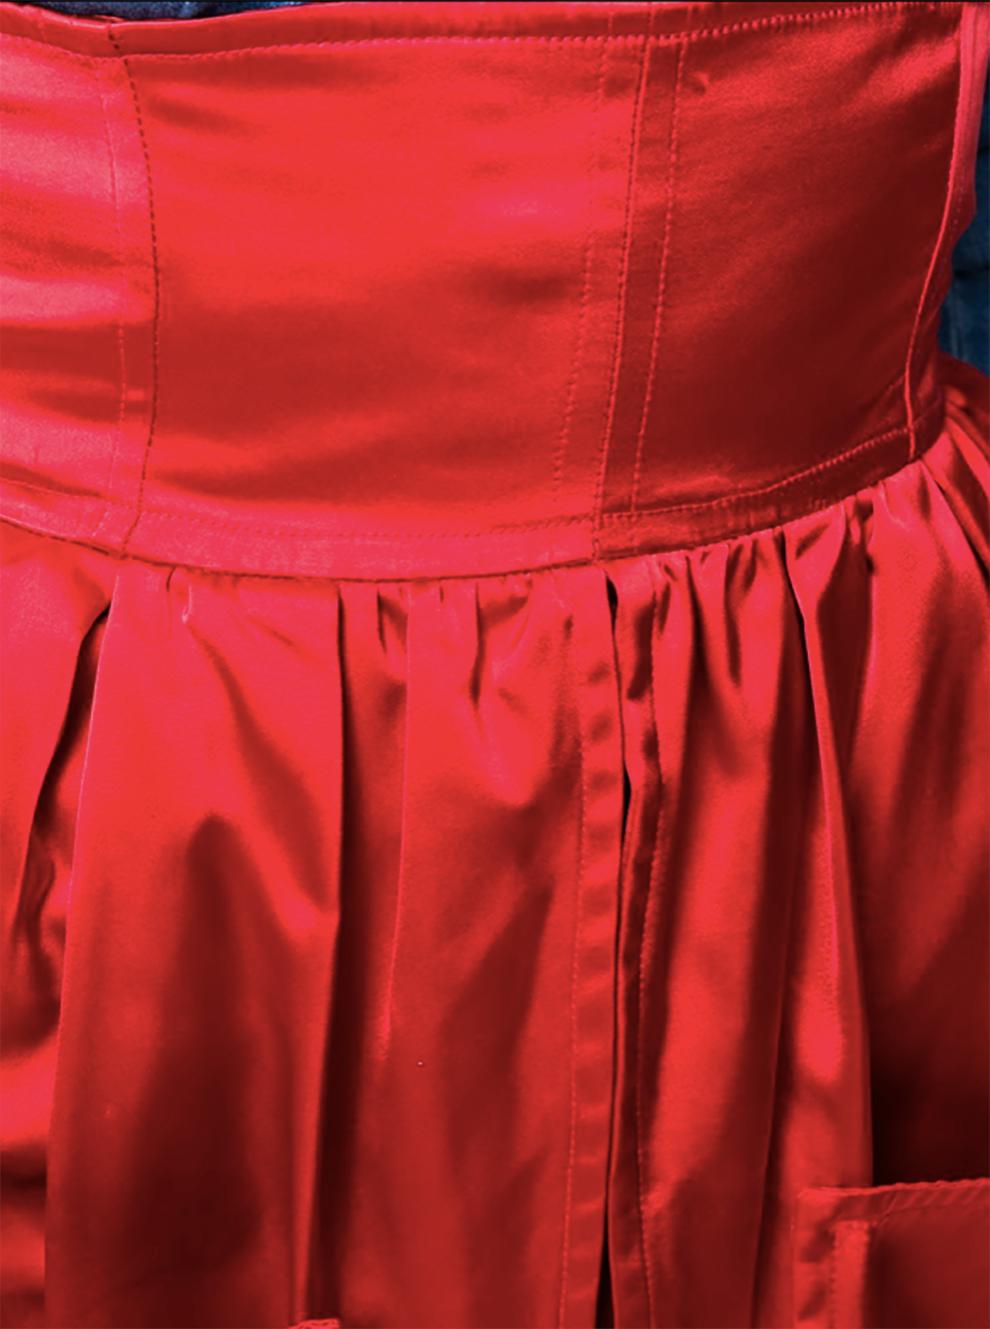 Balenciaga red evening satin skirt featuring a gathered design, a layered design, a front slit, a high rise, a waistband, a side invisible zip fastening and two front pockets. 
In good vintage condition. Made in France. 
Estimated size 38fr/ US6/